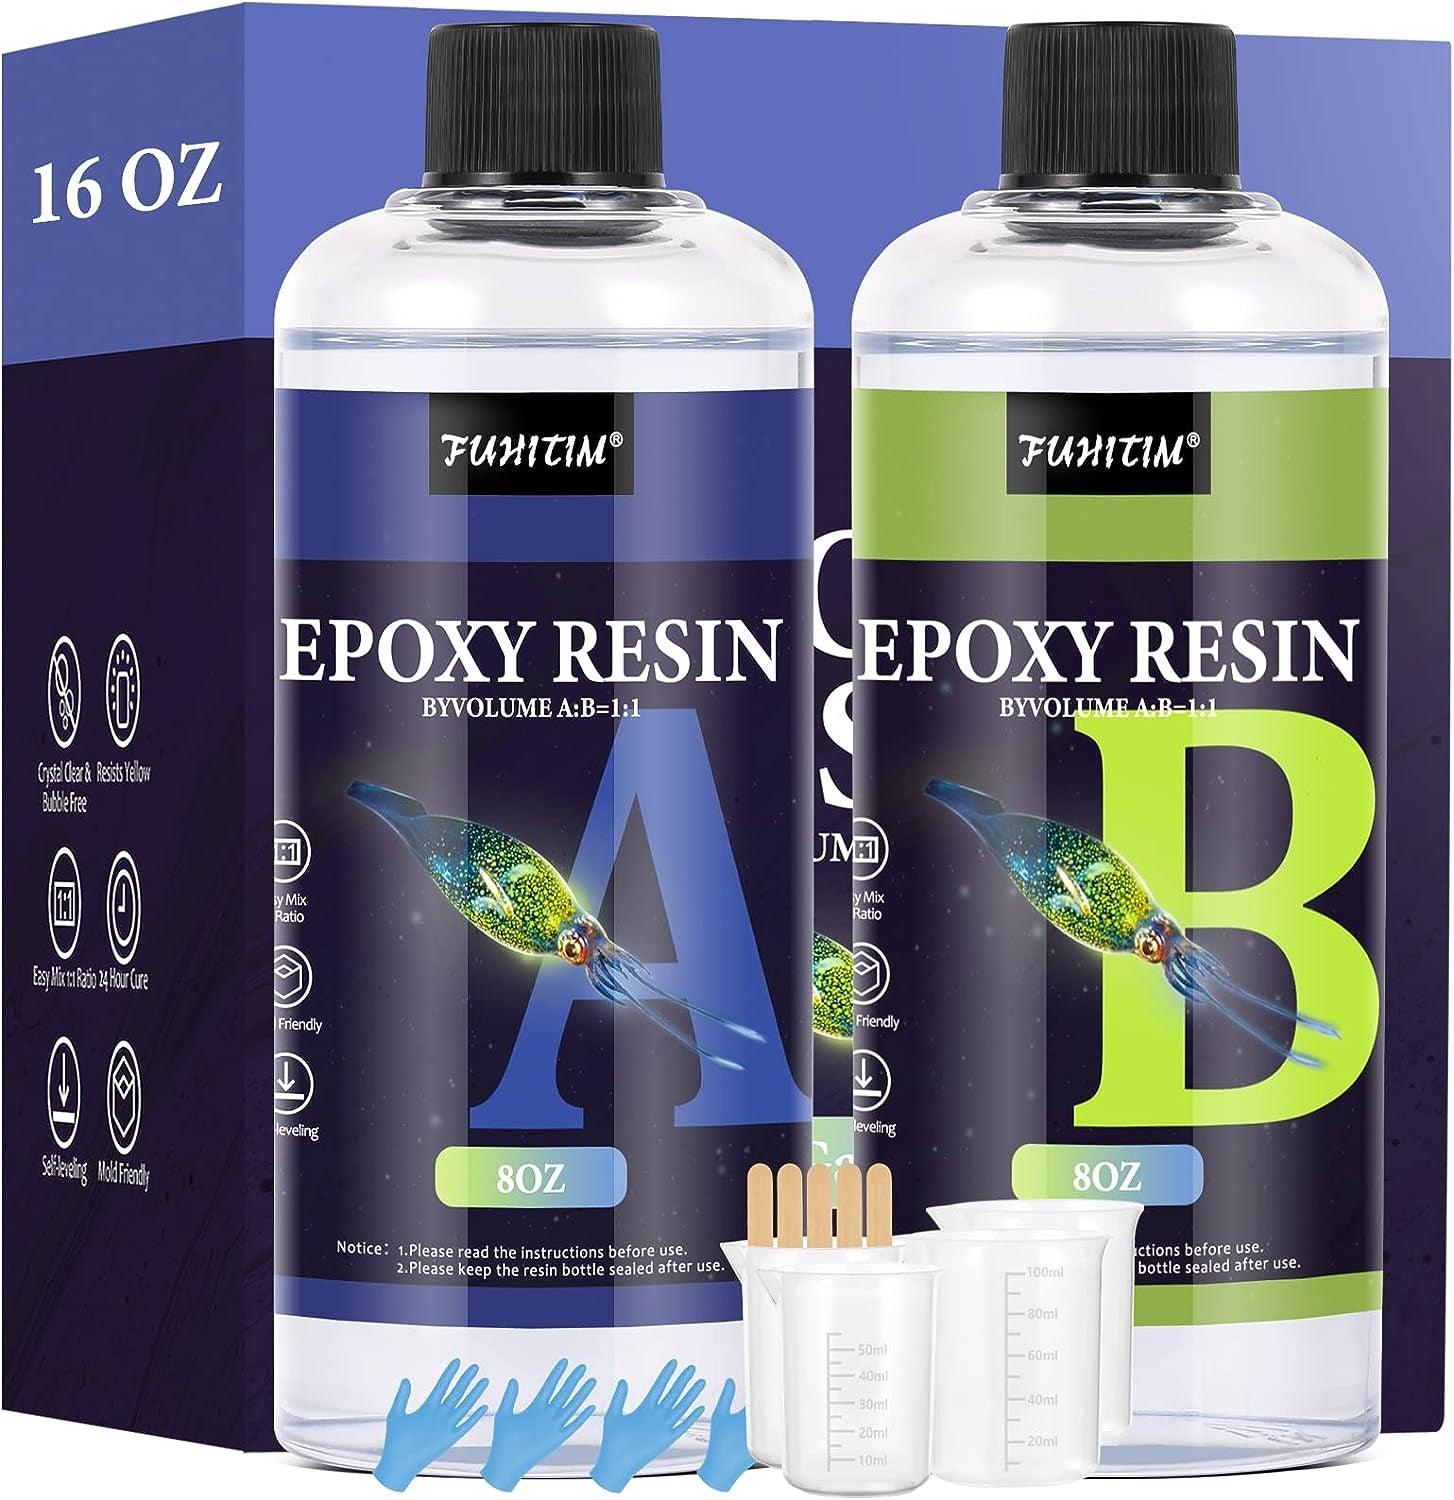 Epoxy Resin 16OZ - Crystal Clear Epoxy Resin Kit - Self-Leveling, High-Glossy, No Yellowing, No Bubbles Casting Resin Perfect for Crafts, Table Tops, DIY 1:1 Ratio - WoodArtSupply